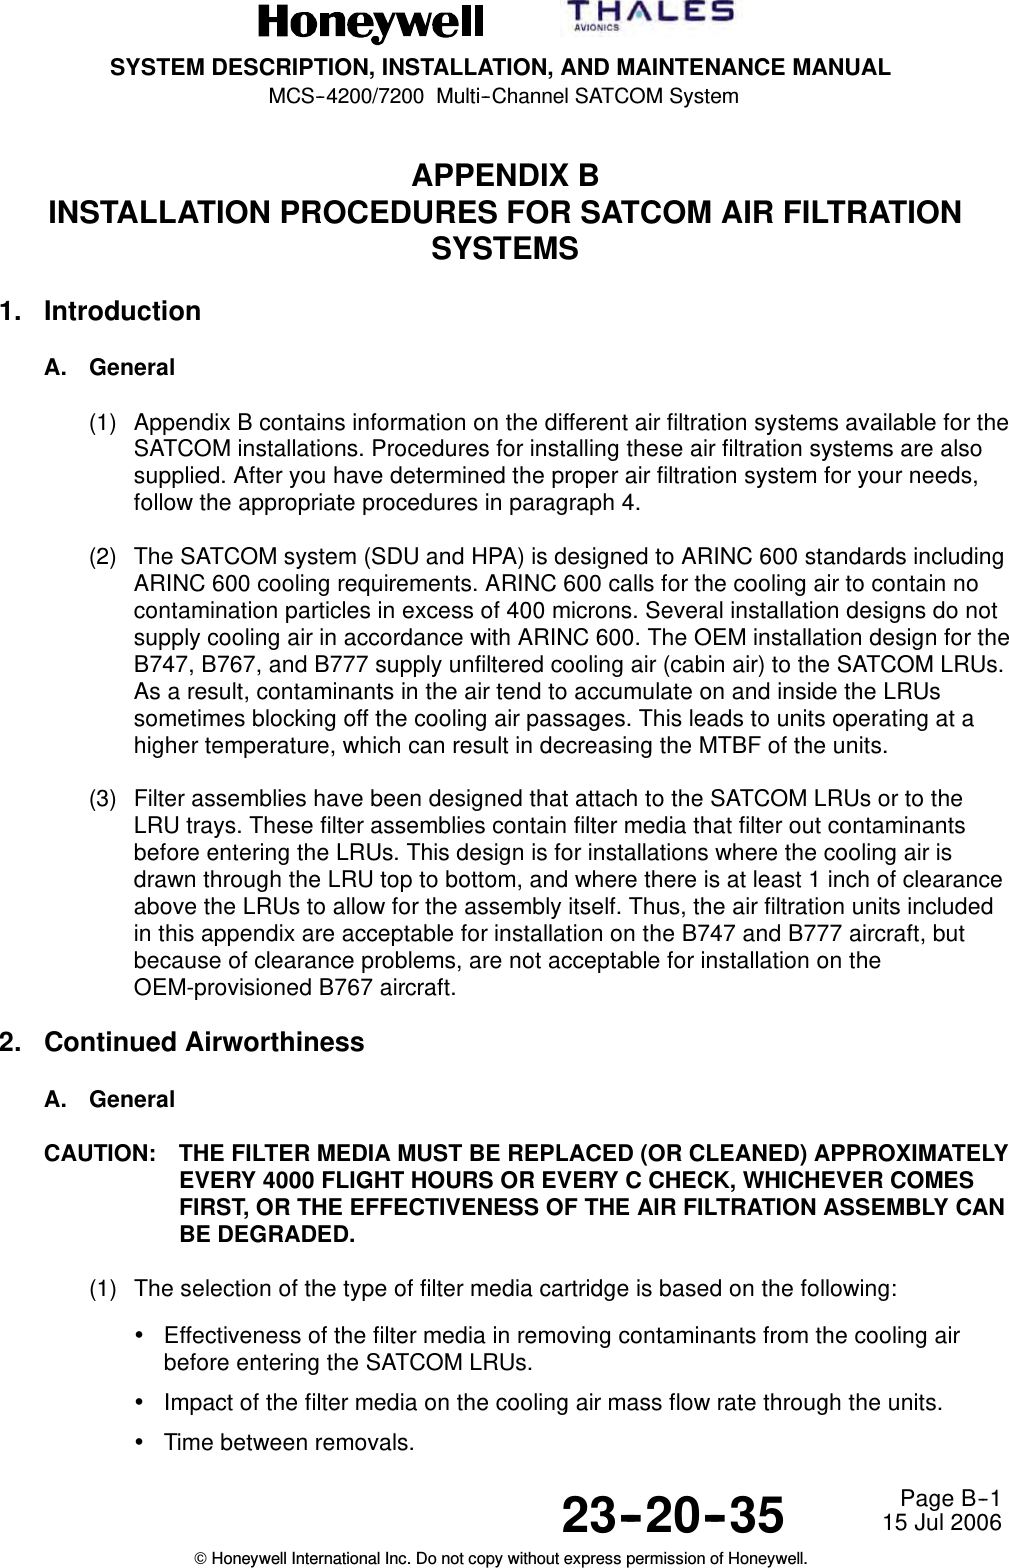 SYSTEM DESCRIPTION, INSTALLATION, AND MAINTENANCE MANUALMCS--4200/7200 Multi--Channel SATCOM System23--20--35 15 Jul 2006Honeywell International Inc. Do not copy without express permission of Honeywell.Page B--1APPENDIX BINSTALLATION PROCEDURES FOR SATCOM AIR FILTRATIONSYSTEMS1. IntroductionA. General(1) Appendix B contains information on the different air filtration systems available for theSATCOM installations. Procedures for installing these air filtration systems are alsosupplied. After you have determined the proper air filtration system for your needs,follow the appropriate procedures in paragraph 4.(2) The SATCOM system (SDU and HPA) is designed to ARINC 600 standards includingARINC 600 cooling requirements. ARINC 600 calls for the cooling air to contain nocontamination particles in excess of 400 microns. Several installation designs do notsupply cooling air in accordance with ARINC 600. The OEM installation design for theB747, B767, and B777 supply unfiltered cooling air (cabin air) to the SATCOM LRUs.As a result, contaminants in the air tend to accumulate on and inside the LRUssometimes blocking off the cooling air passages. This leads to units operating at ahigher temperature, which can result in decreasing the MTBF of the units.(3) Filter assemblies have been designed that attach to the SATCOM LRUs or to theLRU trays. These filter assemblies contain filter media that filter out contaminantsbefore entering the LRUs. This design is for installations where the cooling air isdrawn through the LRU top to bottom, and where there is at least 1 inch of clearanceabove the LRUs to allow for the assembly itself. Thus, the air filtration units includedin this appendix are acceptable for installation on the B747 and B777 aircraft, butbecause of clearance problems, are not acceptable for installation on theOEM-provisioned B767 aircraft.2. Continued AirworthinessA. GeneralCAUTION: THE FILTER MEDIA MUST BE REPLACED (OR CLEANED) APPROXIMATELYEVERY 4000 FLIGHT HOURS OR EVERY C CHECK, WHICHEVER COMESFIRST, OR THE EFFECTIVENESS OF THE AIR FILTRATION ASSEMBLY CANBE DEGRADED.(1) The selection of the type of filter media cartridge is based on the following:•Effectiveness of the filter media in removing contaminants from the cooling airbefore entering the SATCOM LRUs.•Impact of the filter media on the cooling air mass flow rate through the units.•Time between removals.